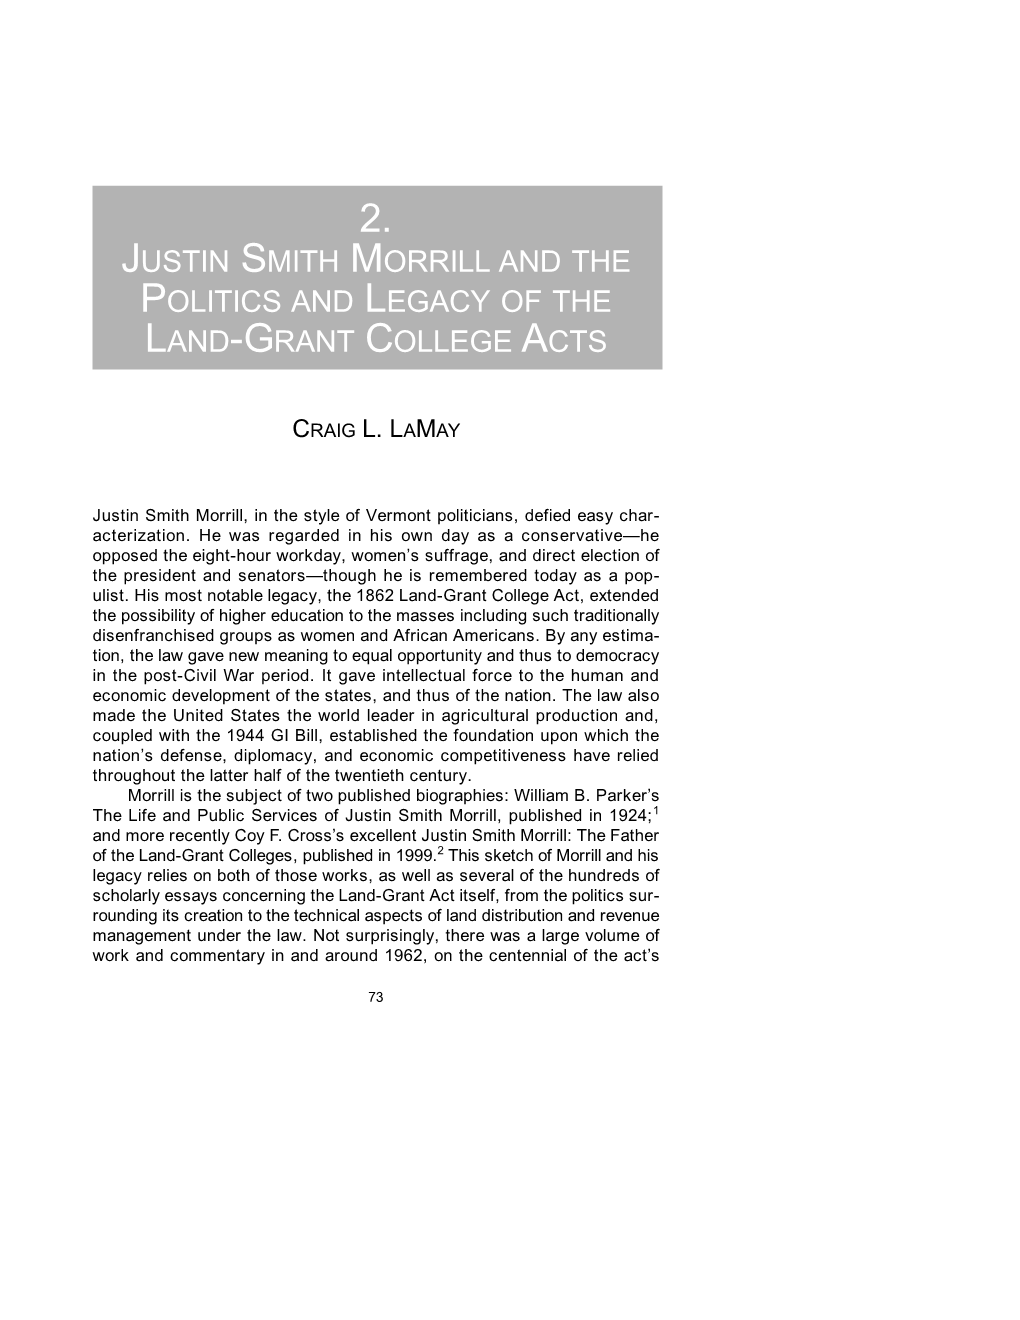 2. Justin Smith Morrill and the Politics and Legacy of the Land-Grant College Acts